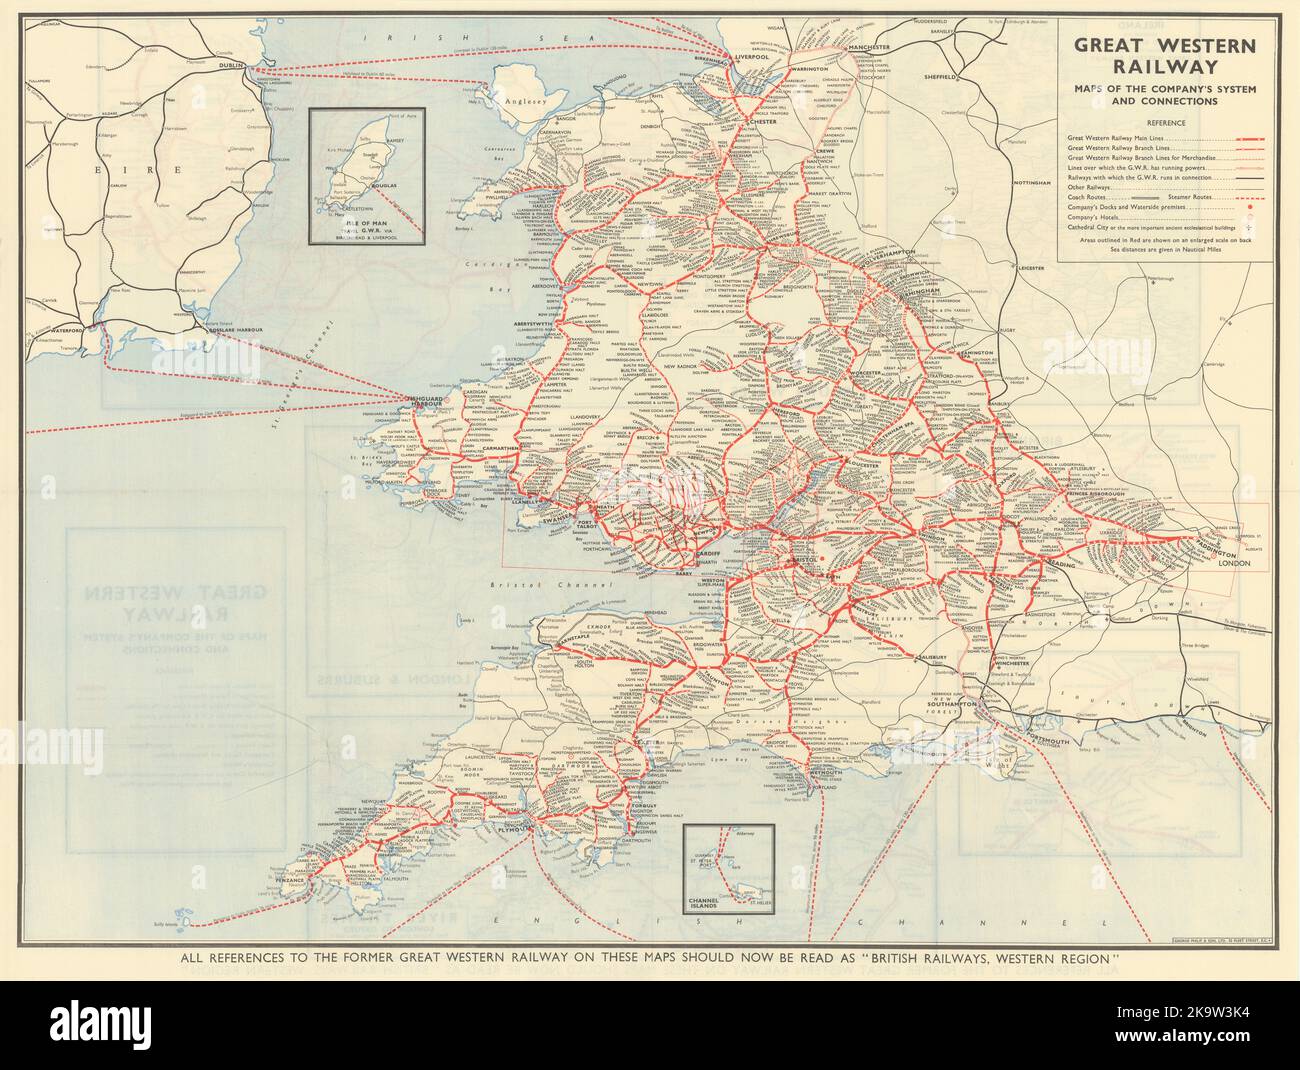 Great Western Railway - maps of the Company's system and connections c1948 Stock Photo